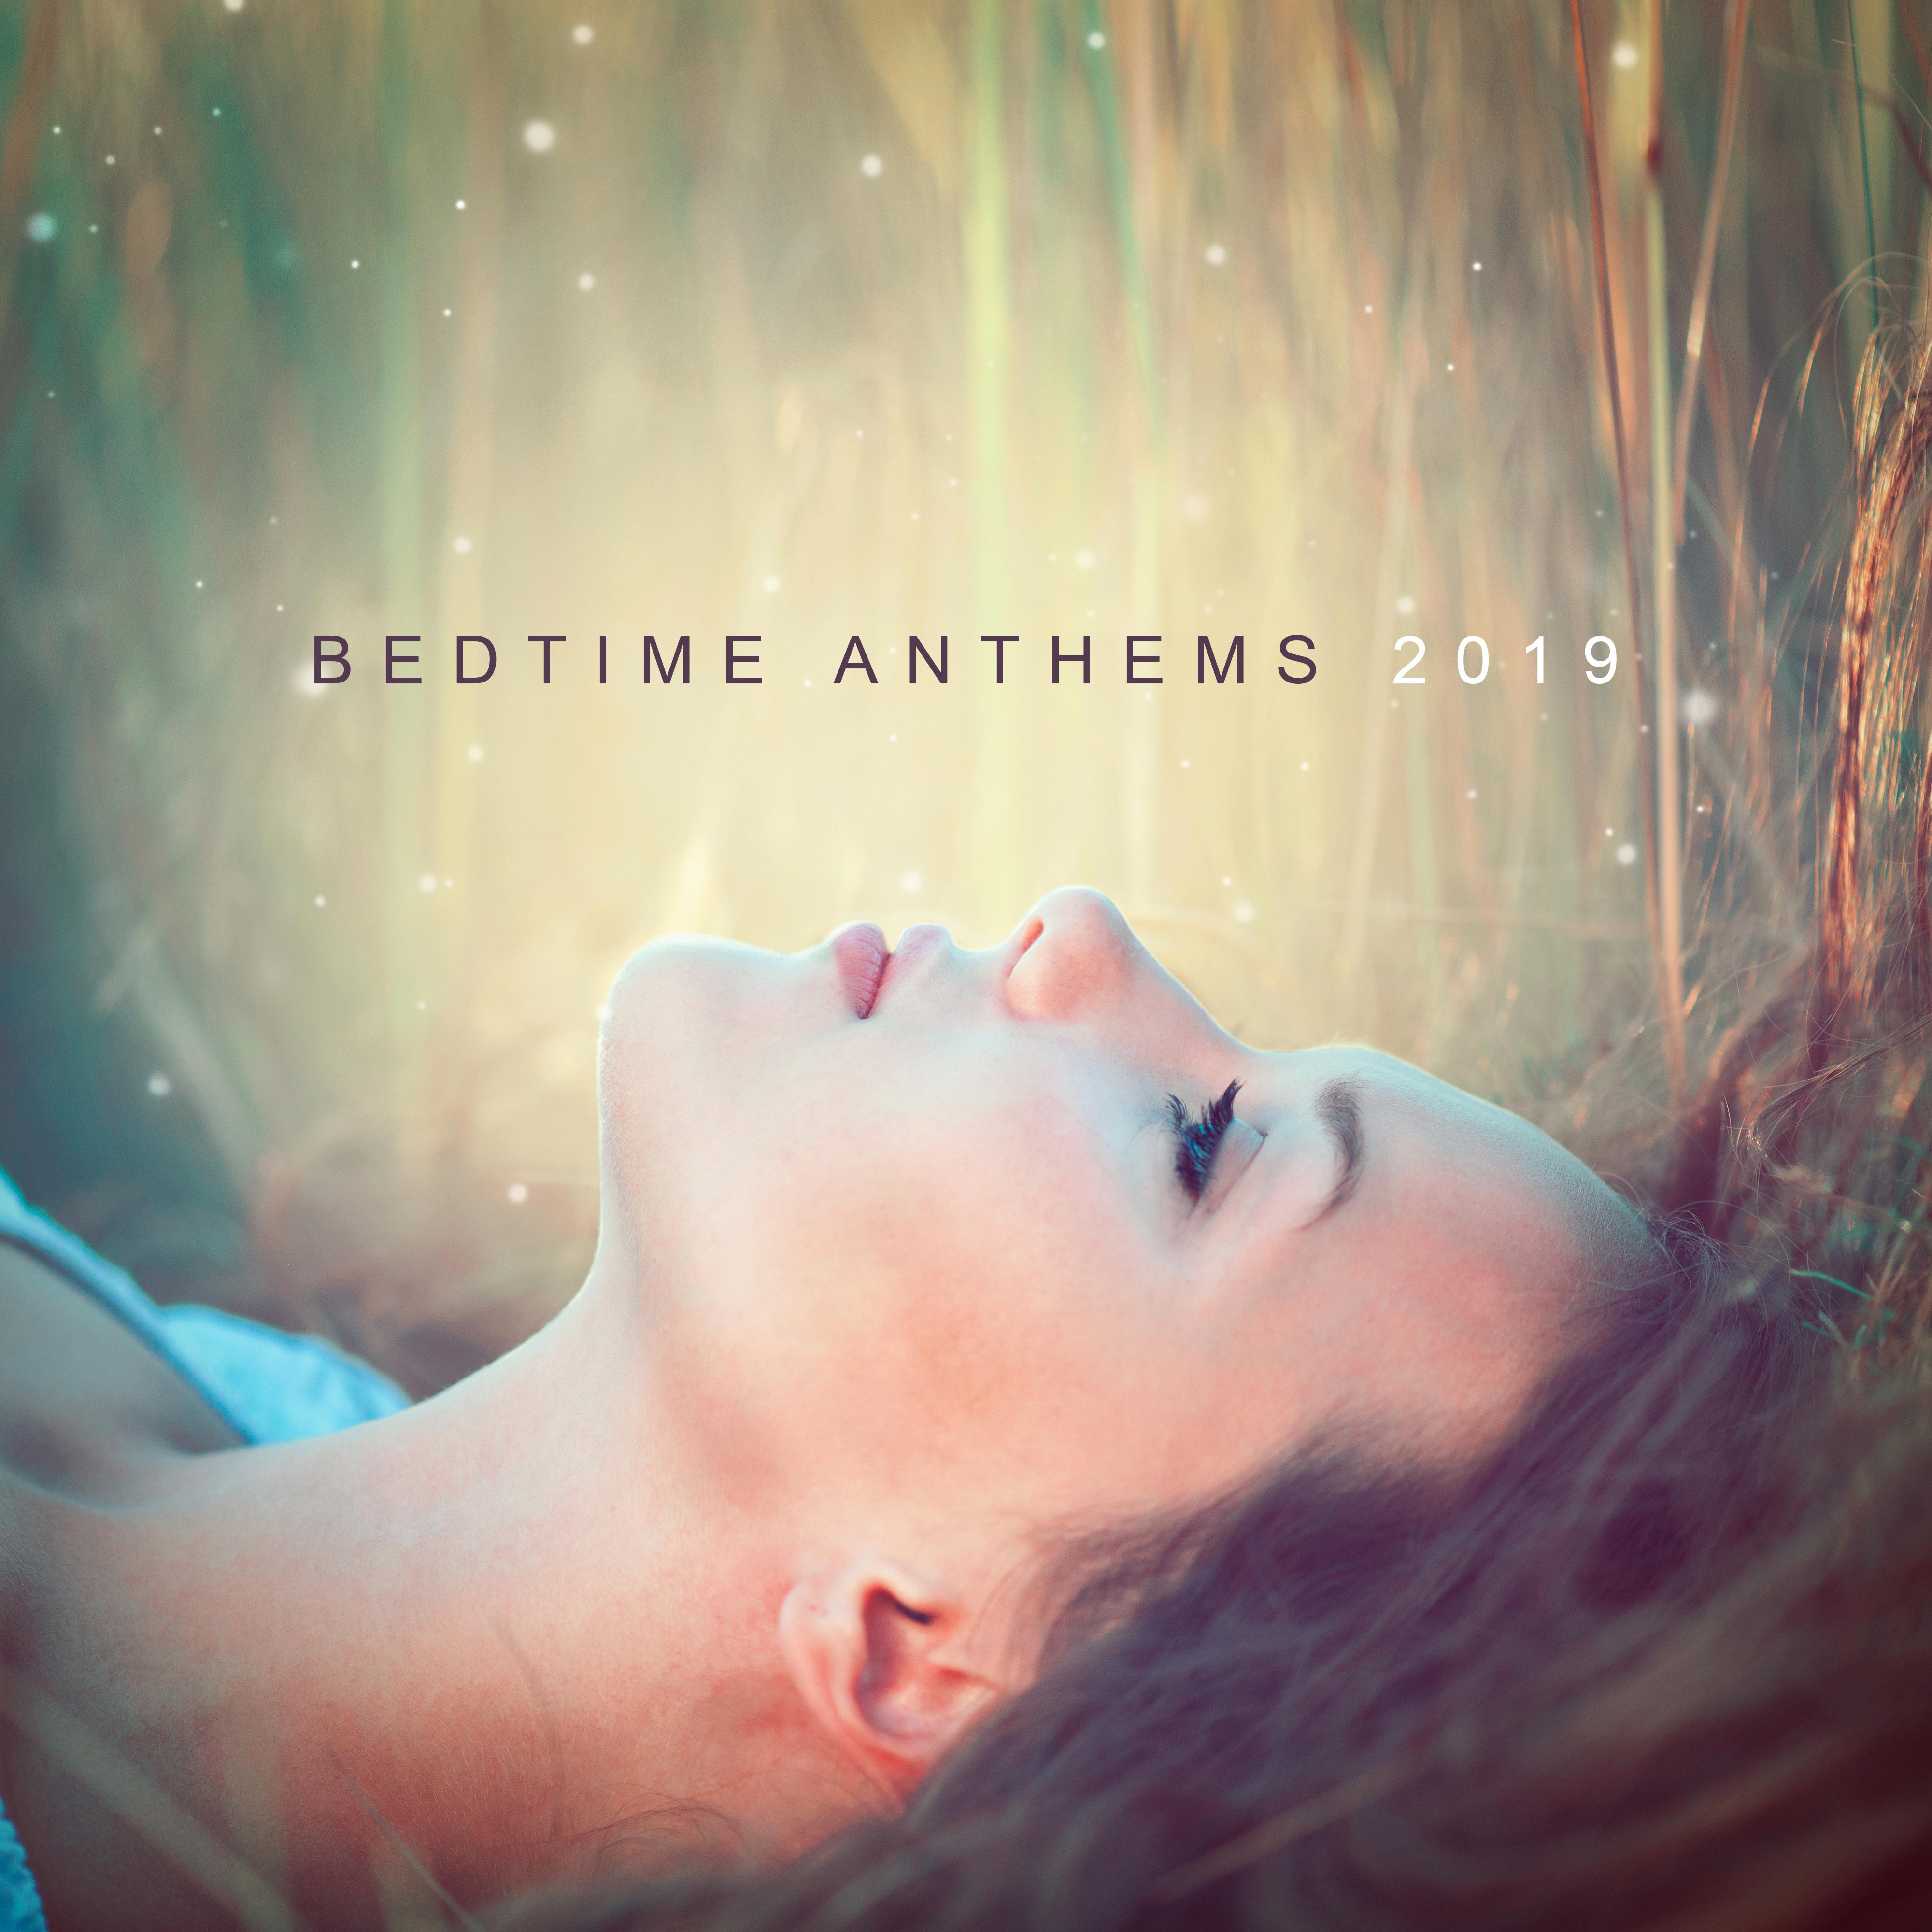 Bedtime Anthems 2019: Best New Age Soft Ambient Music for Evening Relax in Bed, Full Rest, Calming Down, De-stress & Sleep Peacefully All Night Long